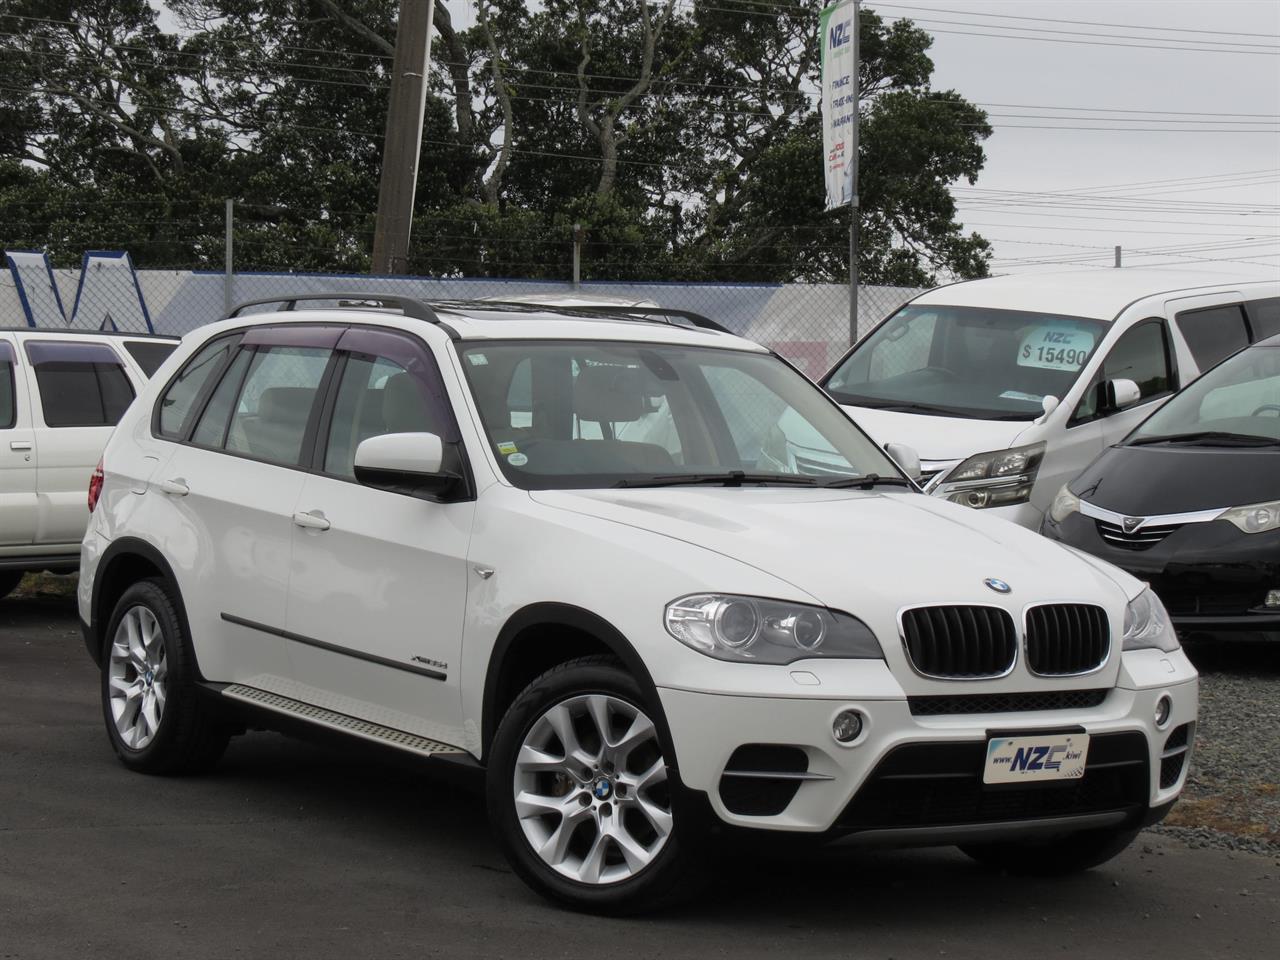 NZC 2012 BMW X5 just arrived to Auckland